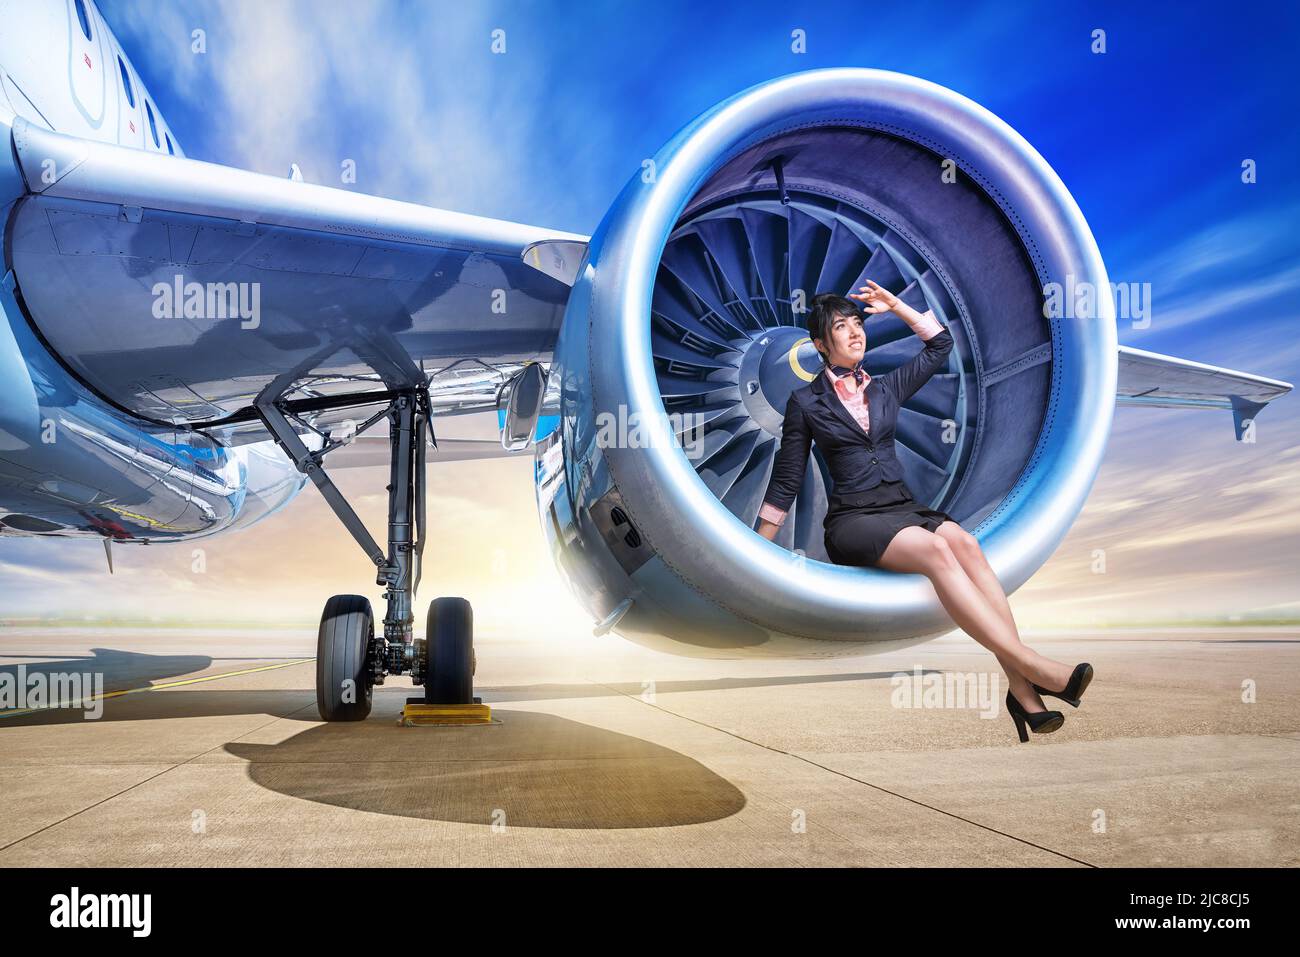 young stewardess sitting in a jet engine Stock Photo